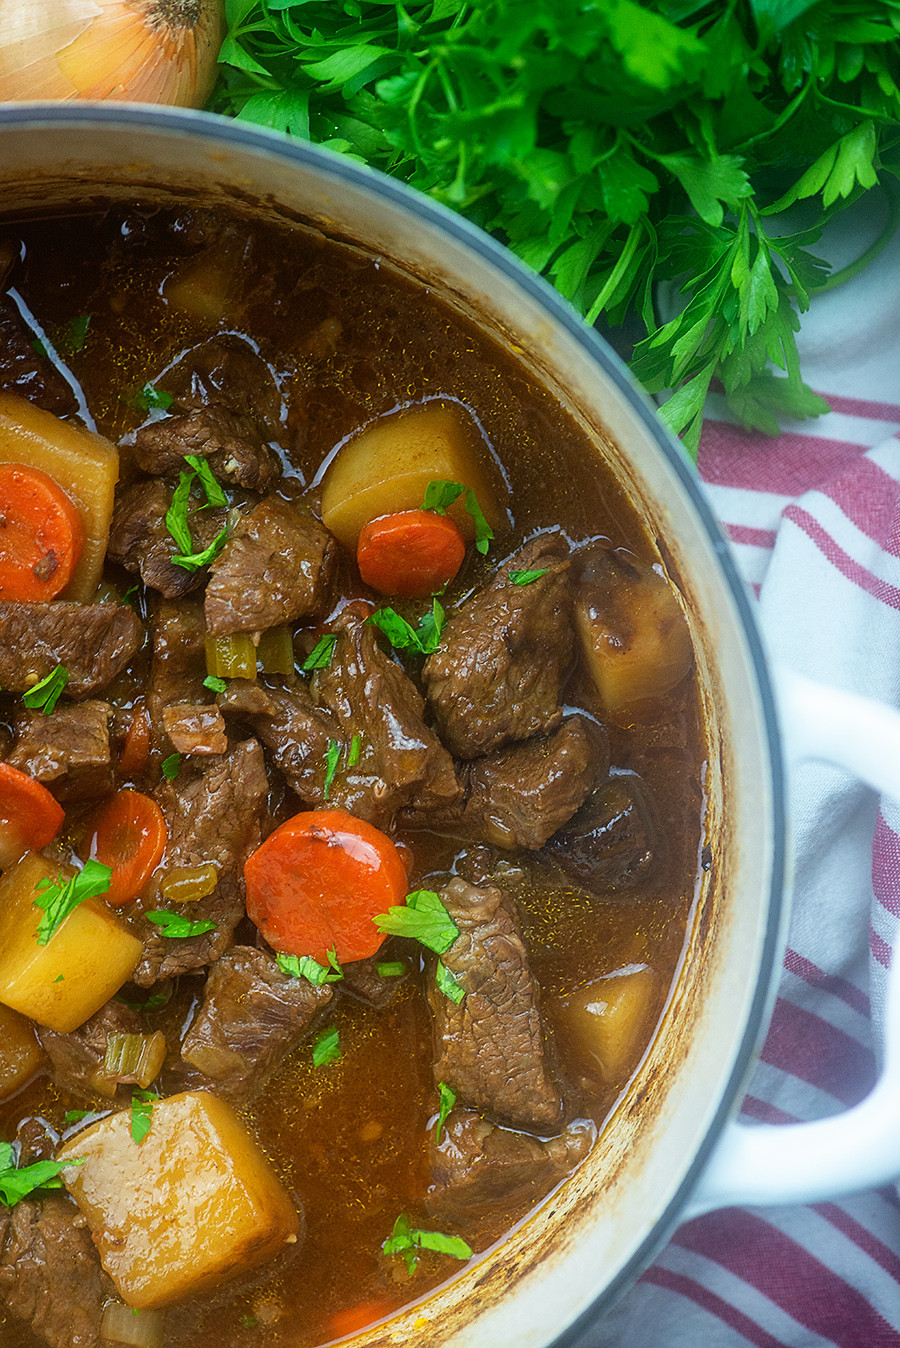 Low Carb Beef Stew
 The BEST Keto Beef Stew Recipe